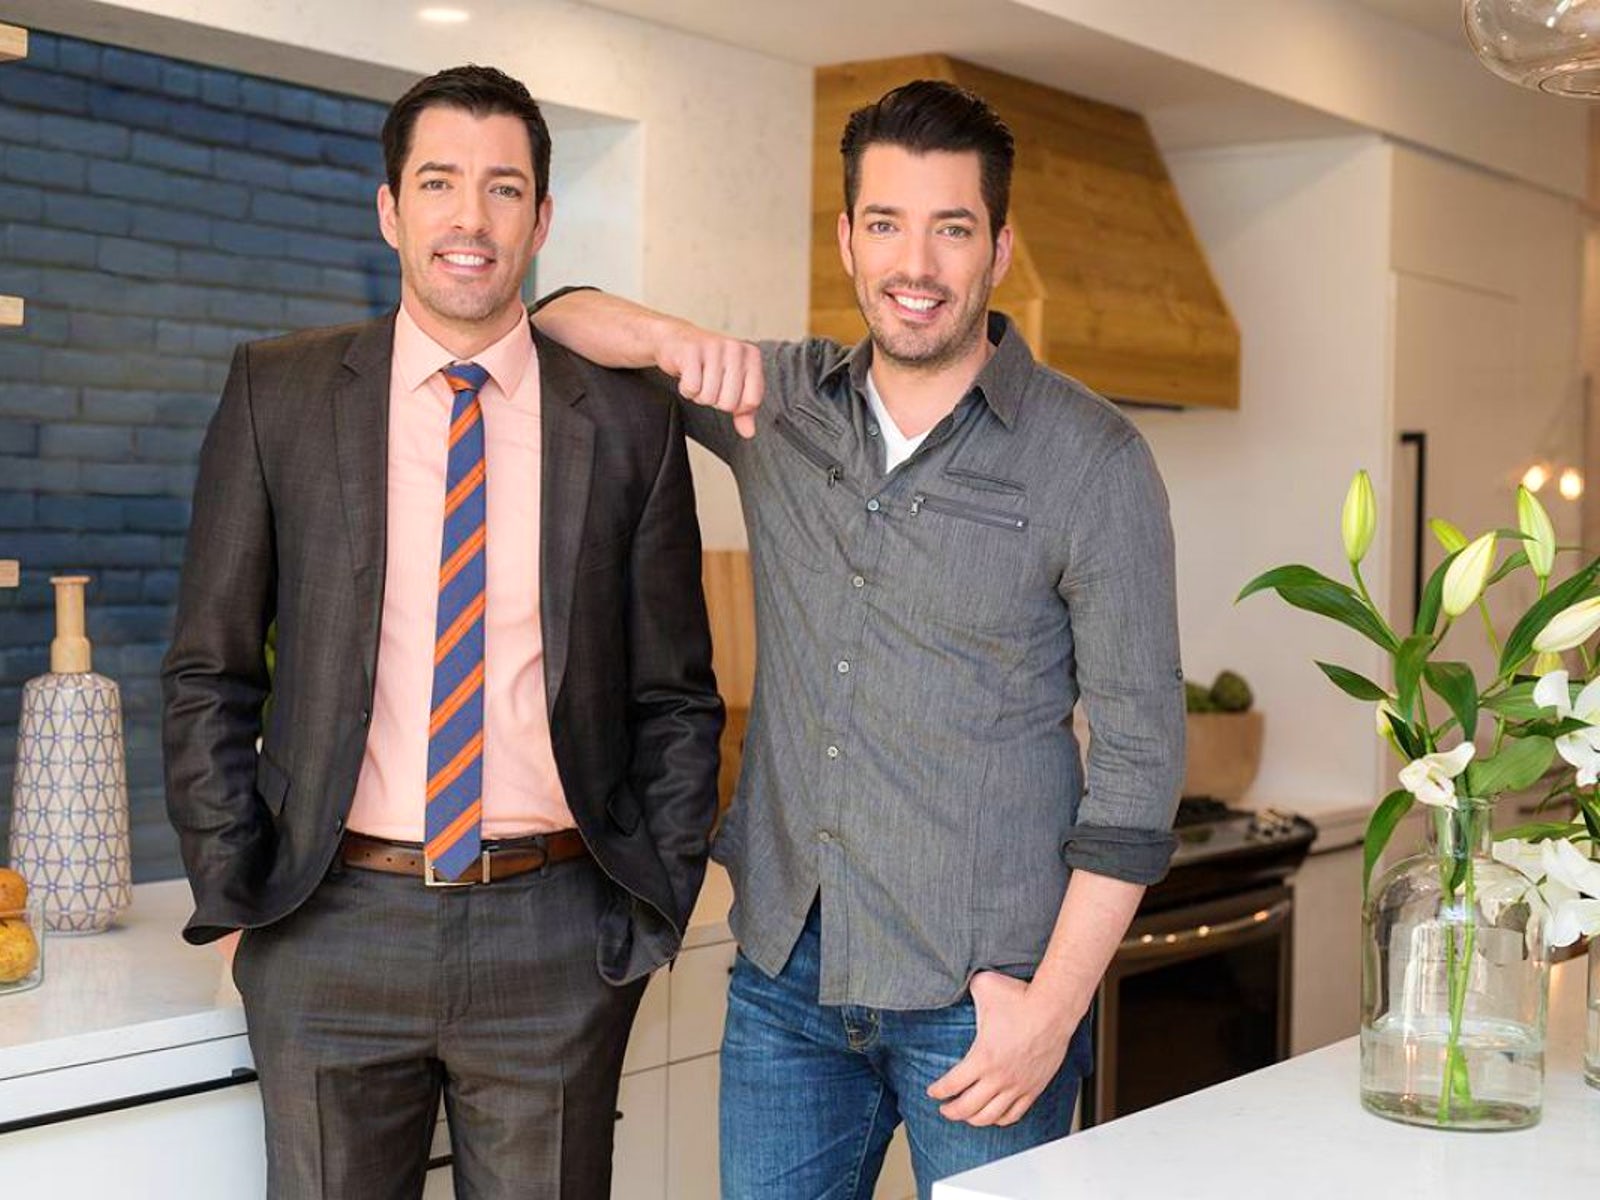  Property Brothers Drew and Jonathan Scott on HGTV's Buying and Selling